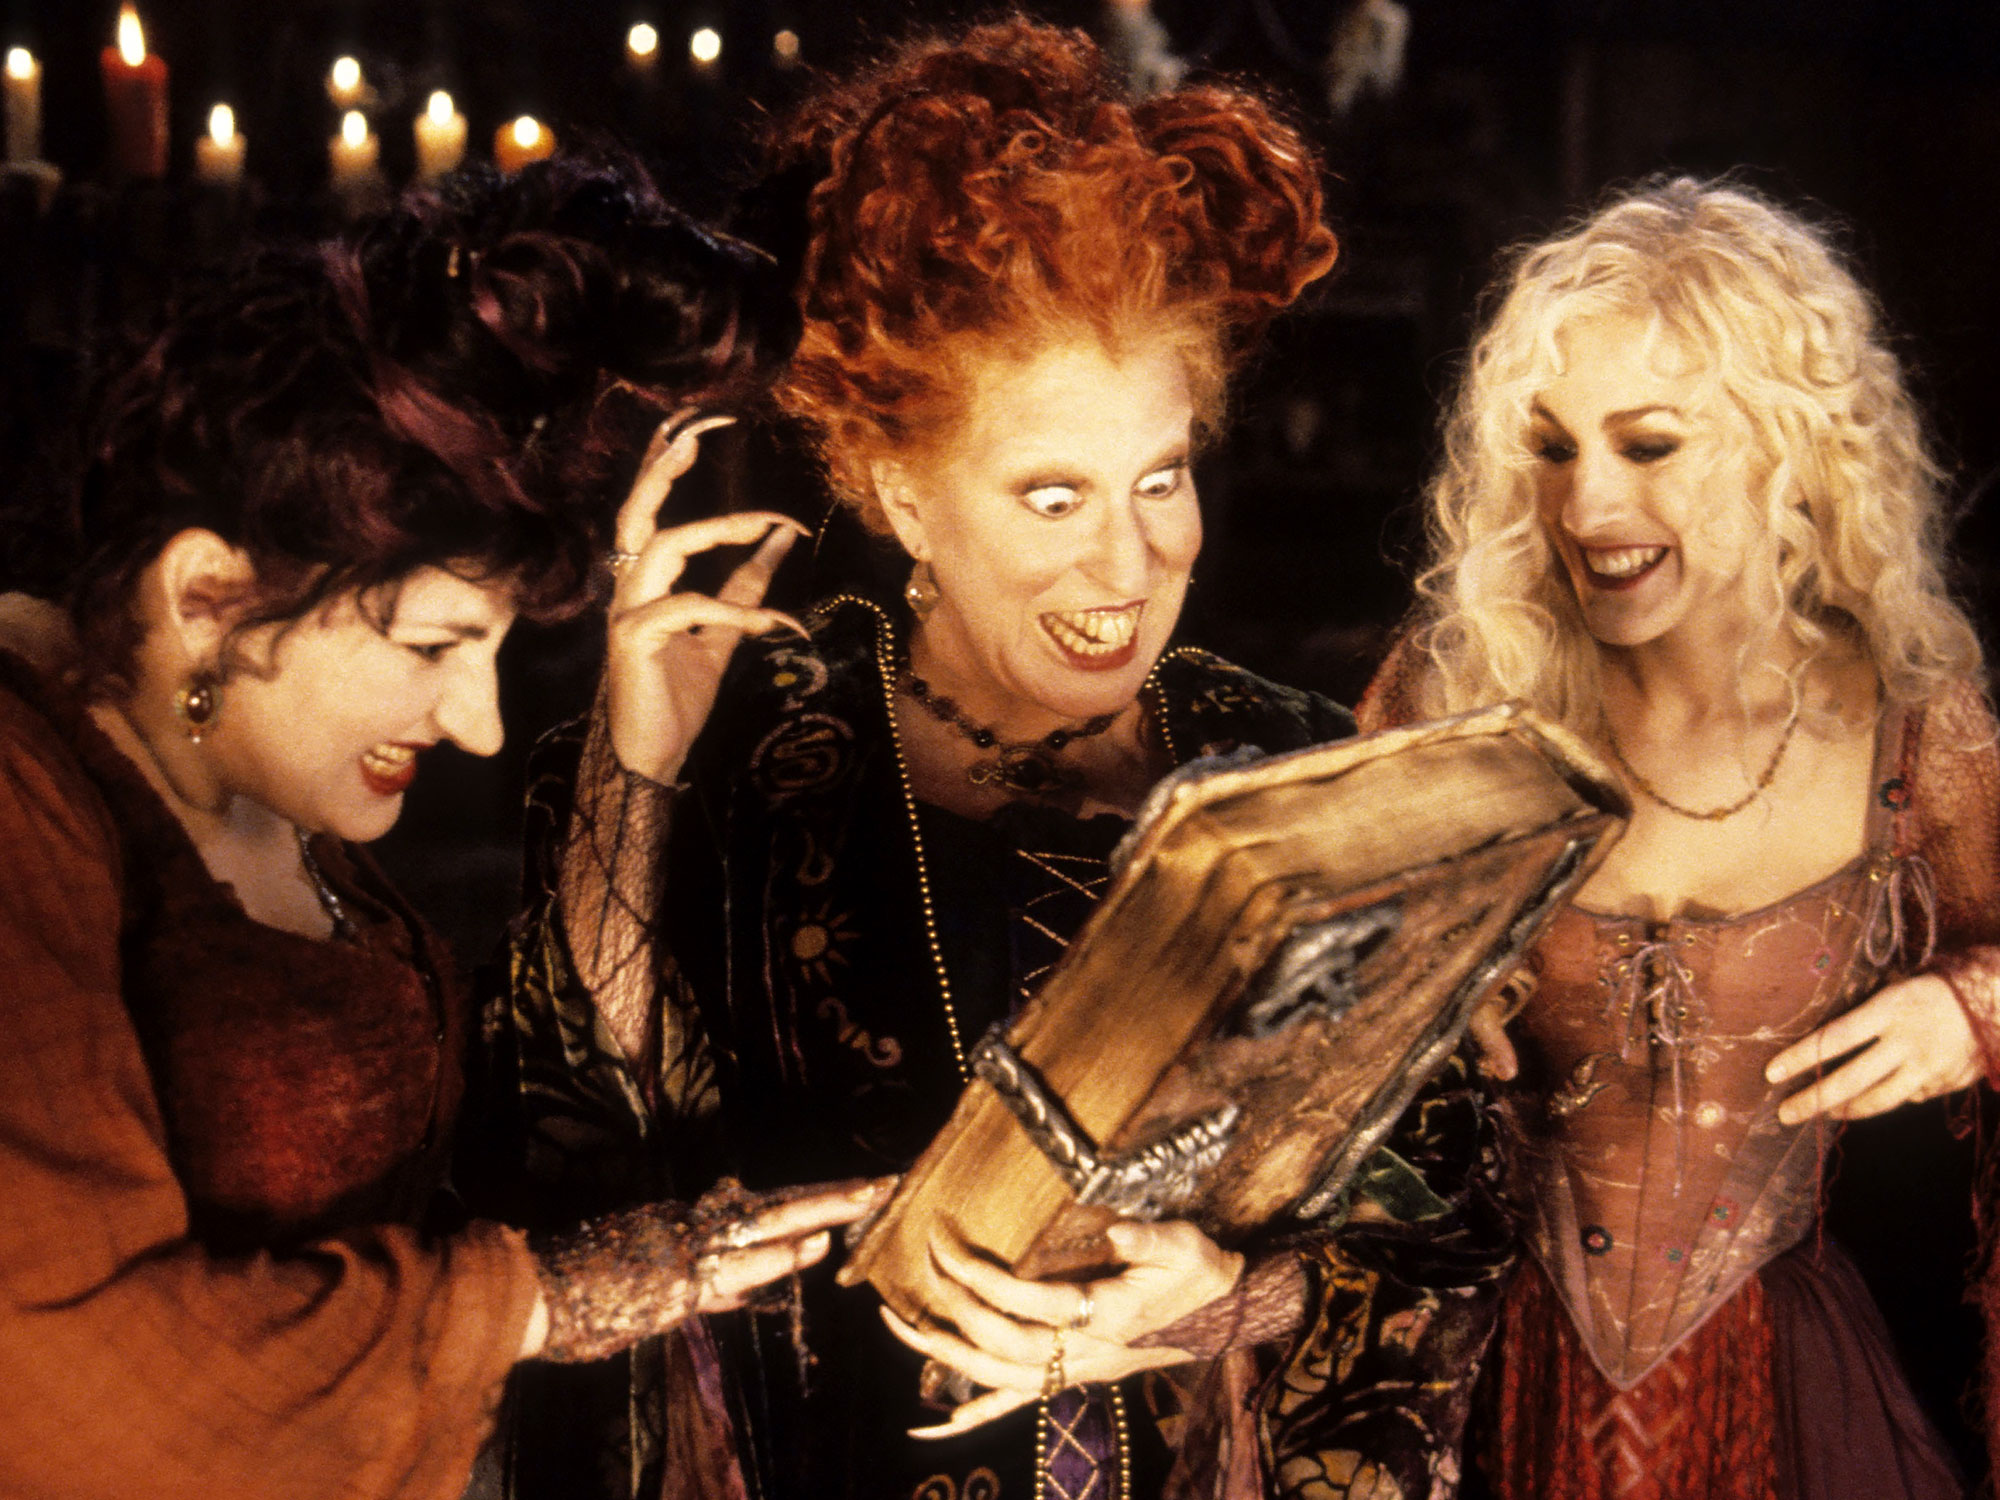 Hocus Pocus 2 How the Sanderson Sisters are bringing back the magic   Good Morning America